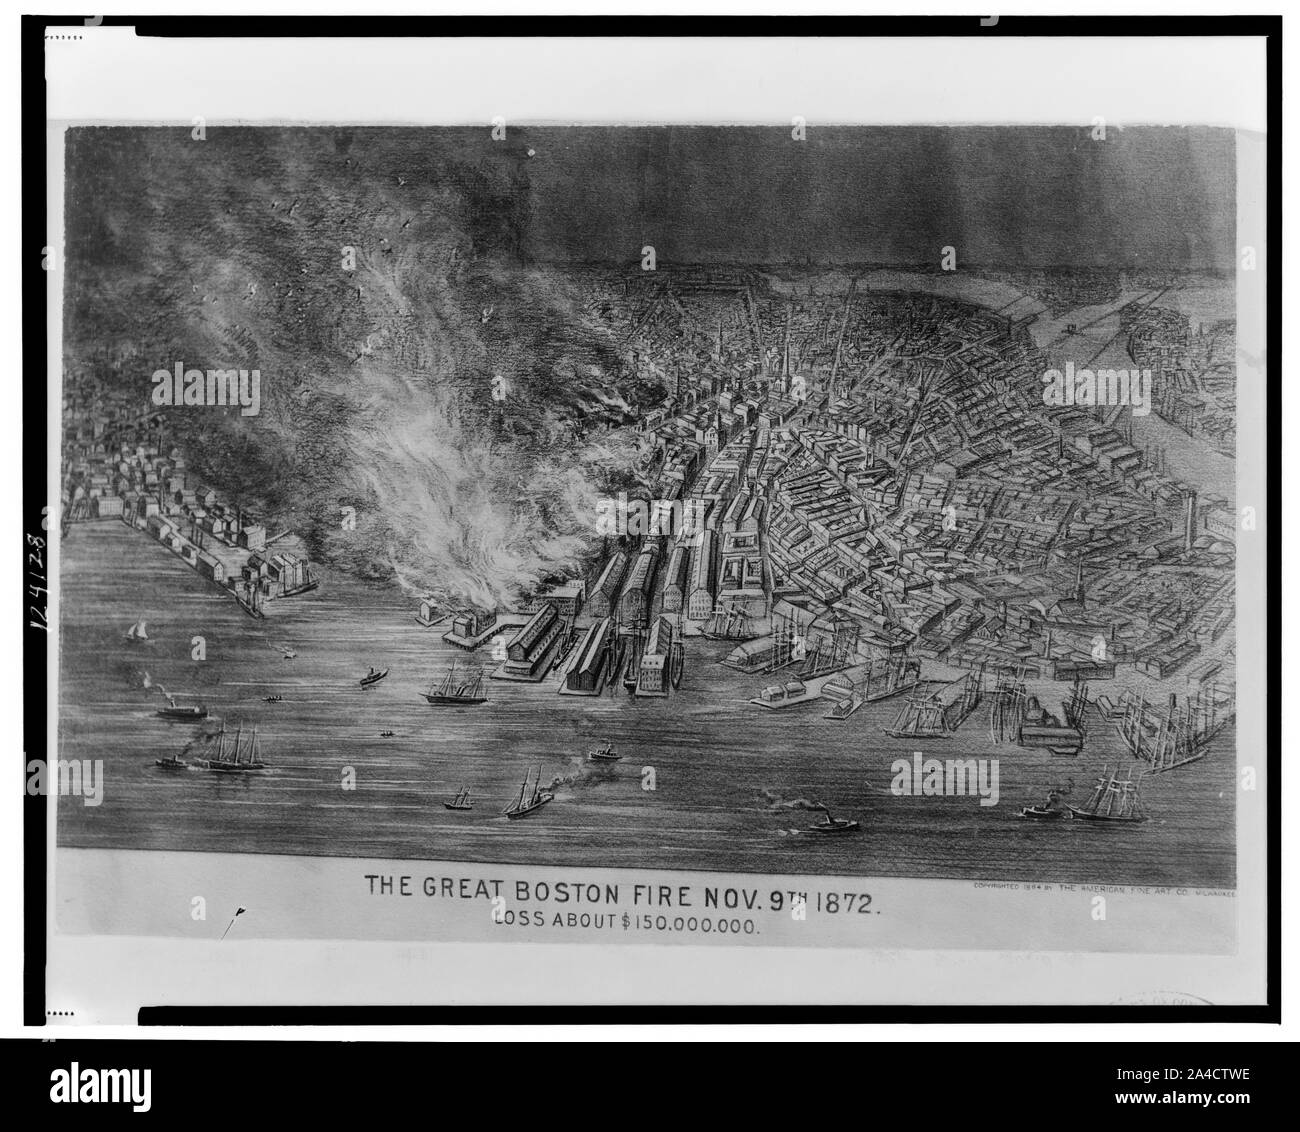 The great Boston fire Nov. 9th 1872--Loss about $150,000,000 Stock Photo